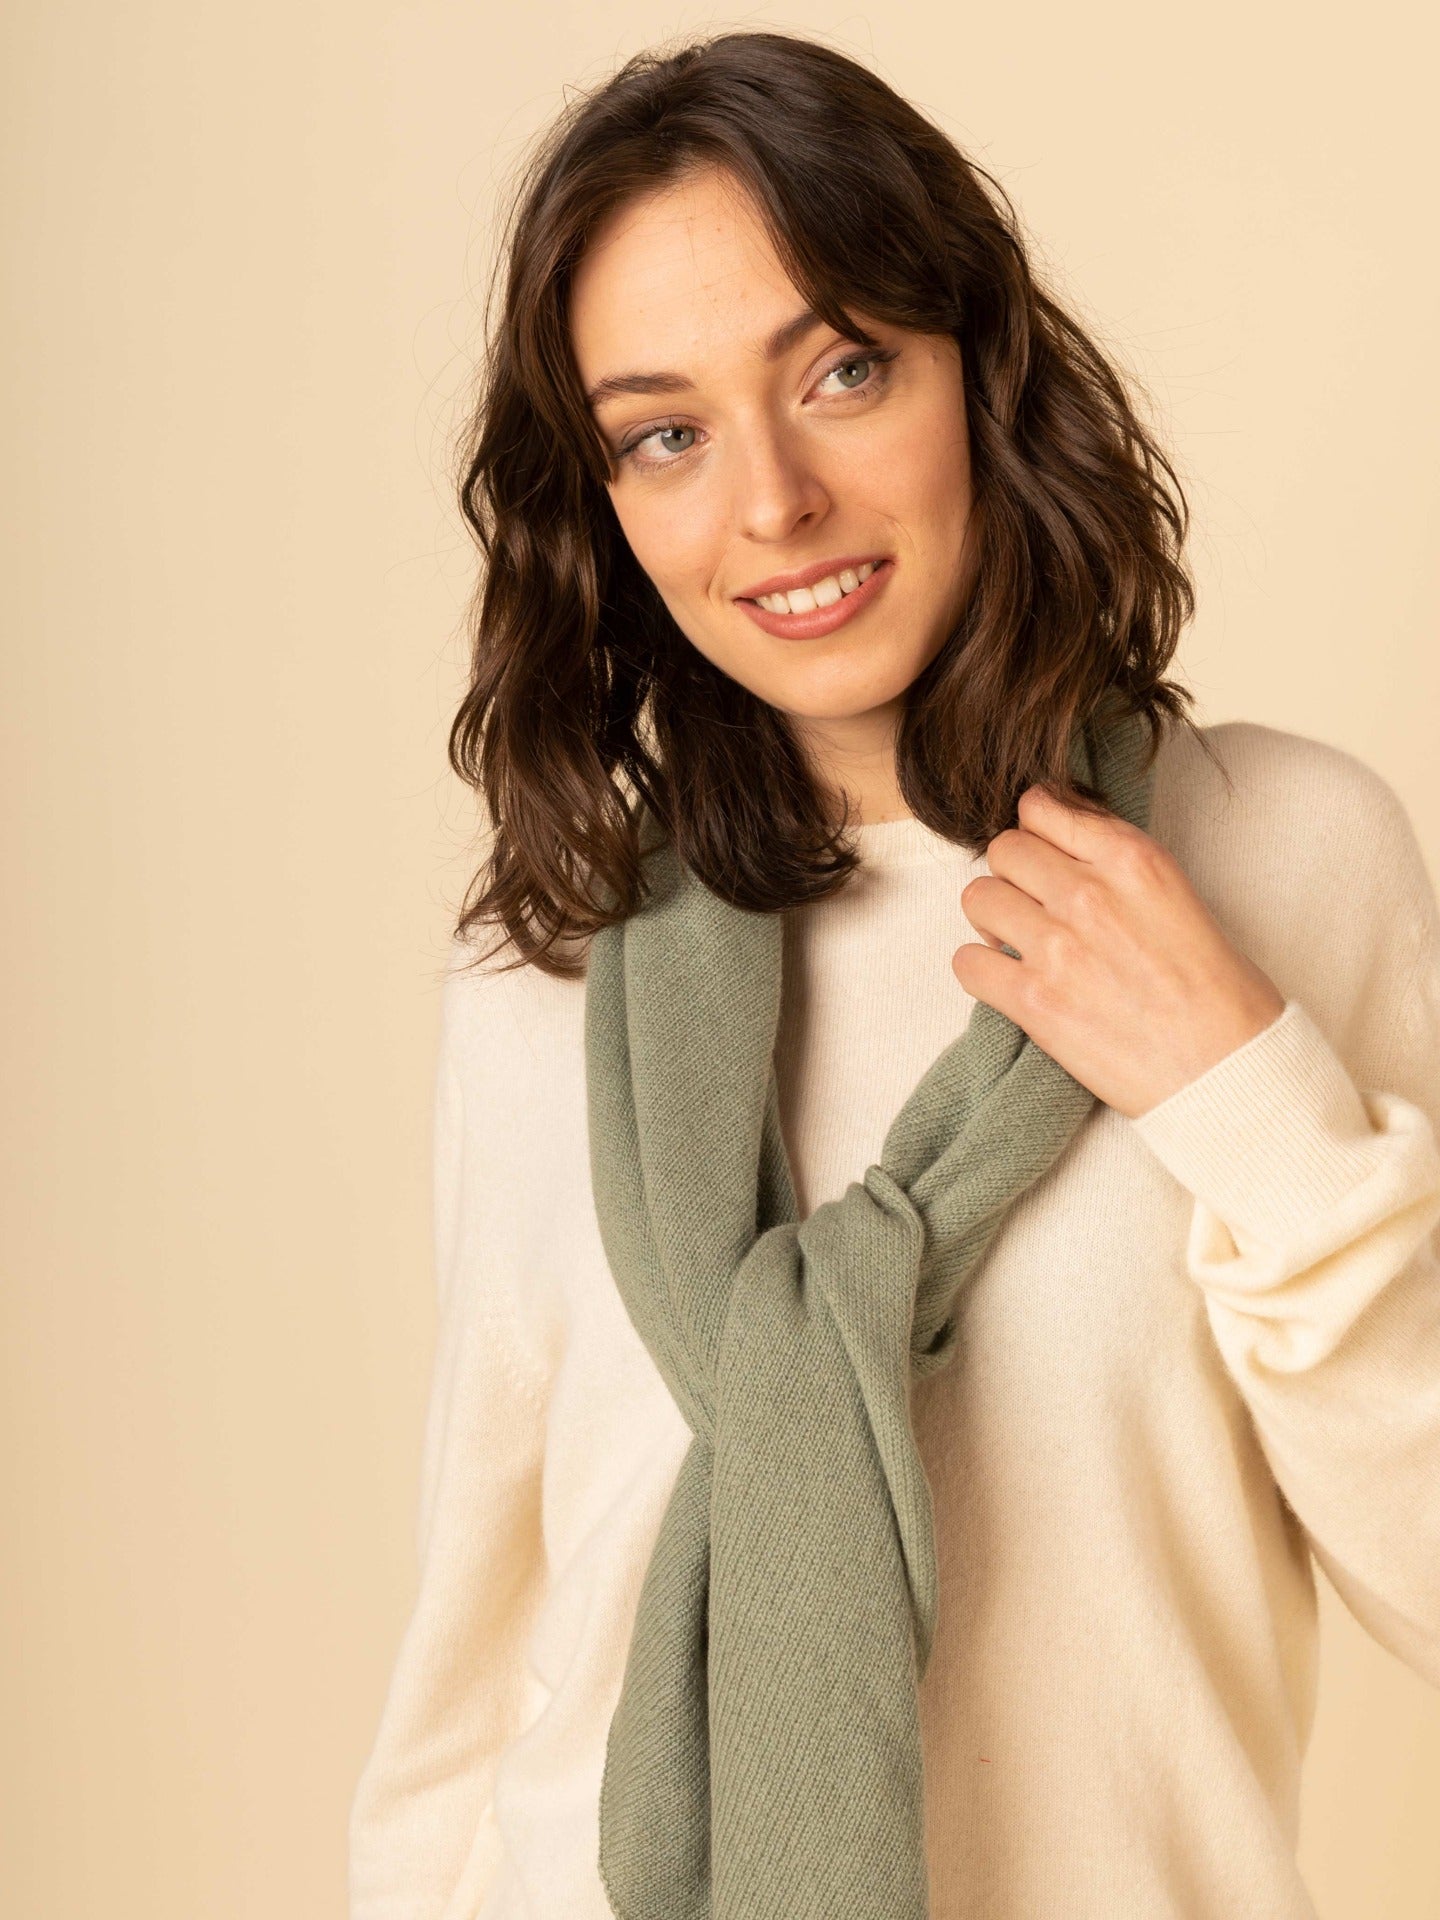 Women's Cashmere Scarves - Our collection